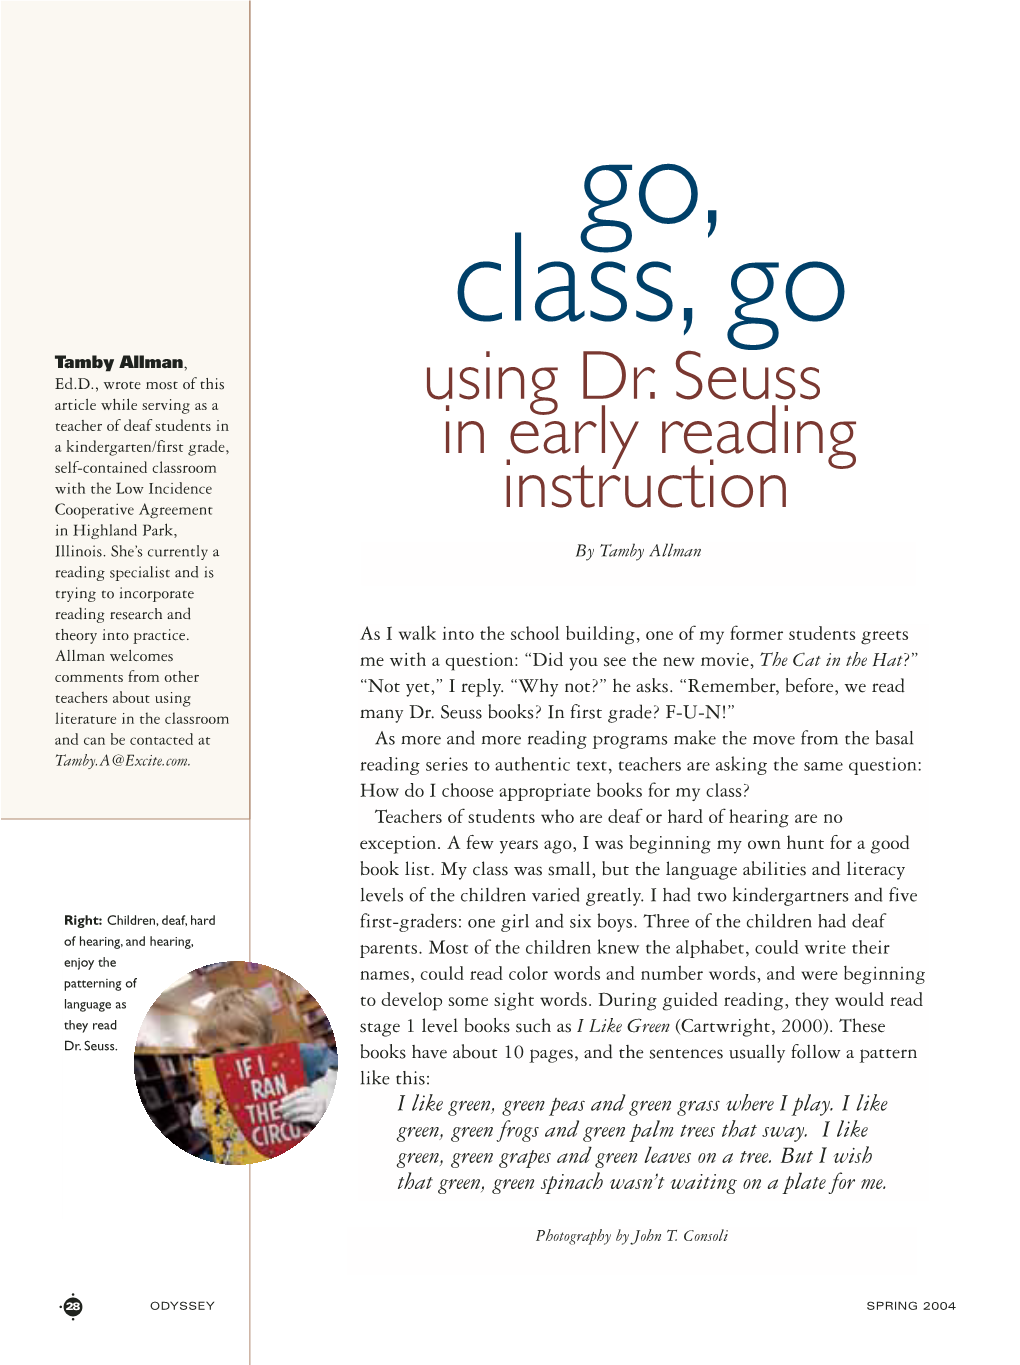 Using Dr. Seuss in Early Reading Instruction Provides Readers” Felt the Rhythm and Experienced Fluency As We Read Many Opportunities to Incorporate Digital Technology